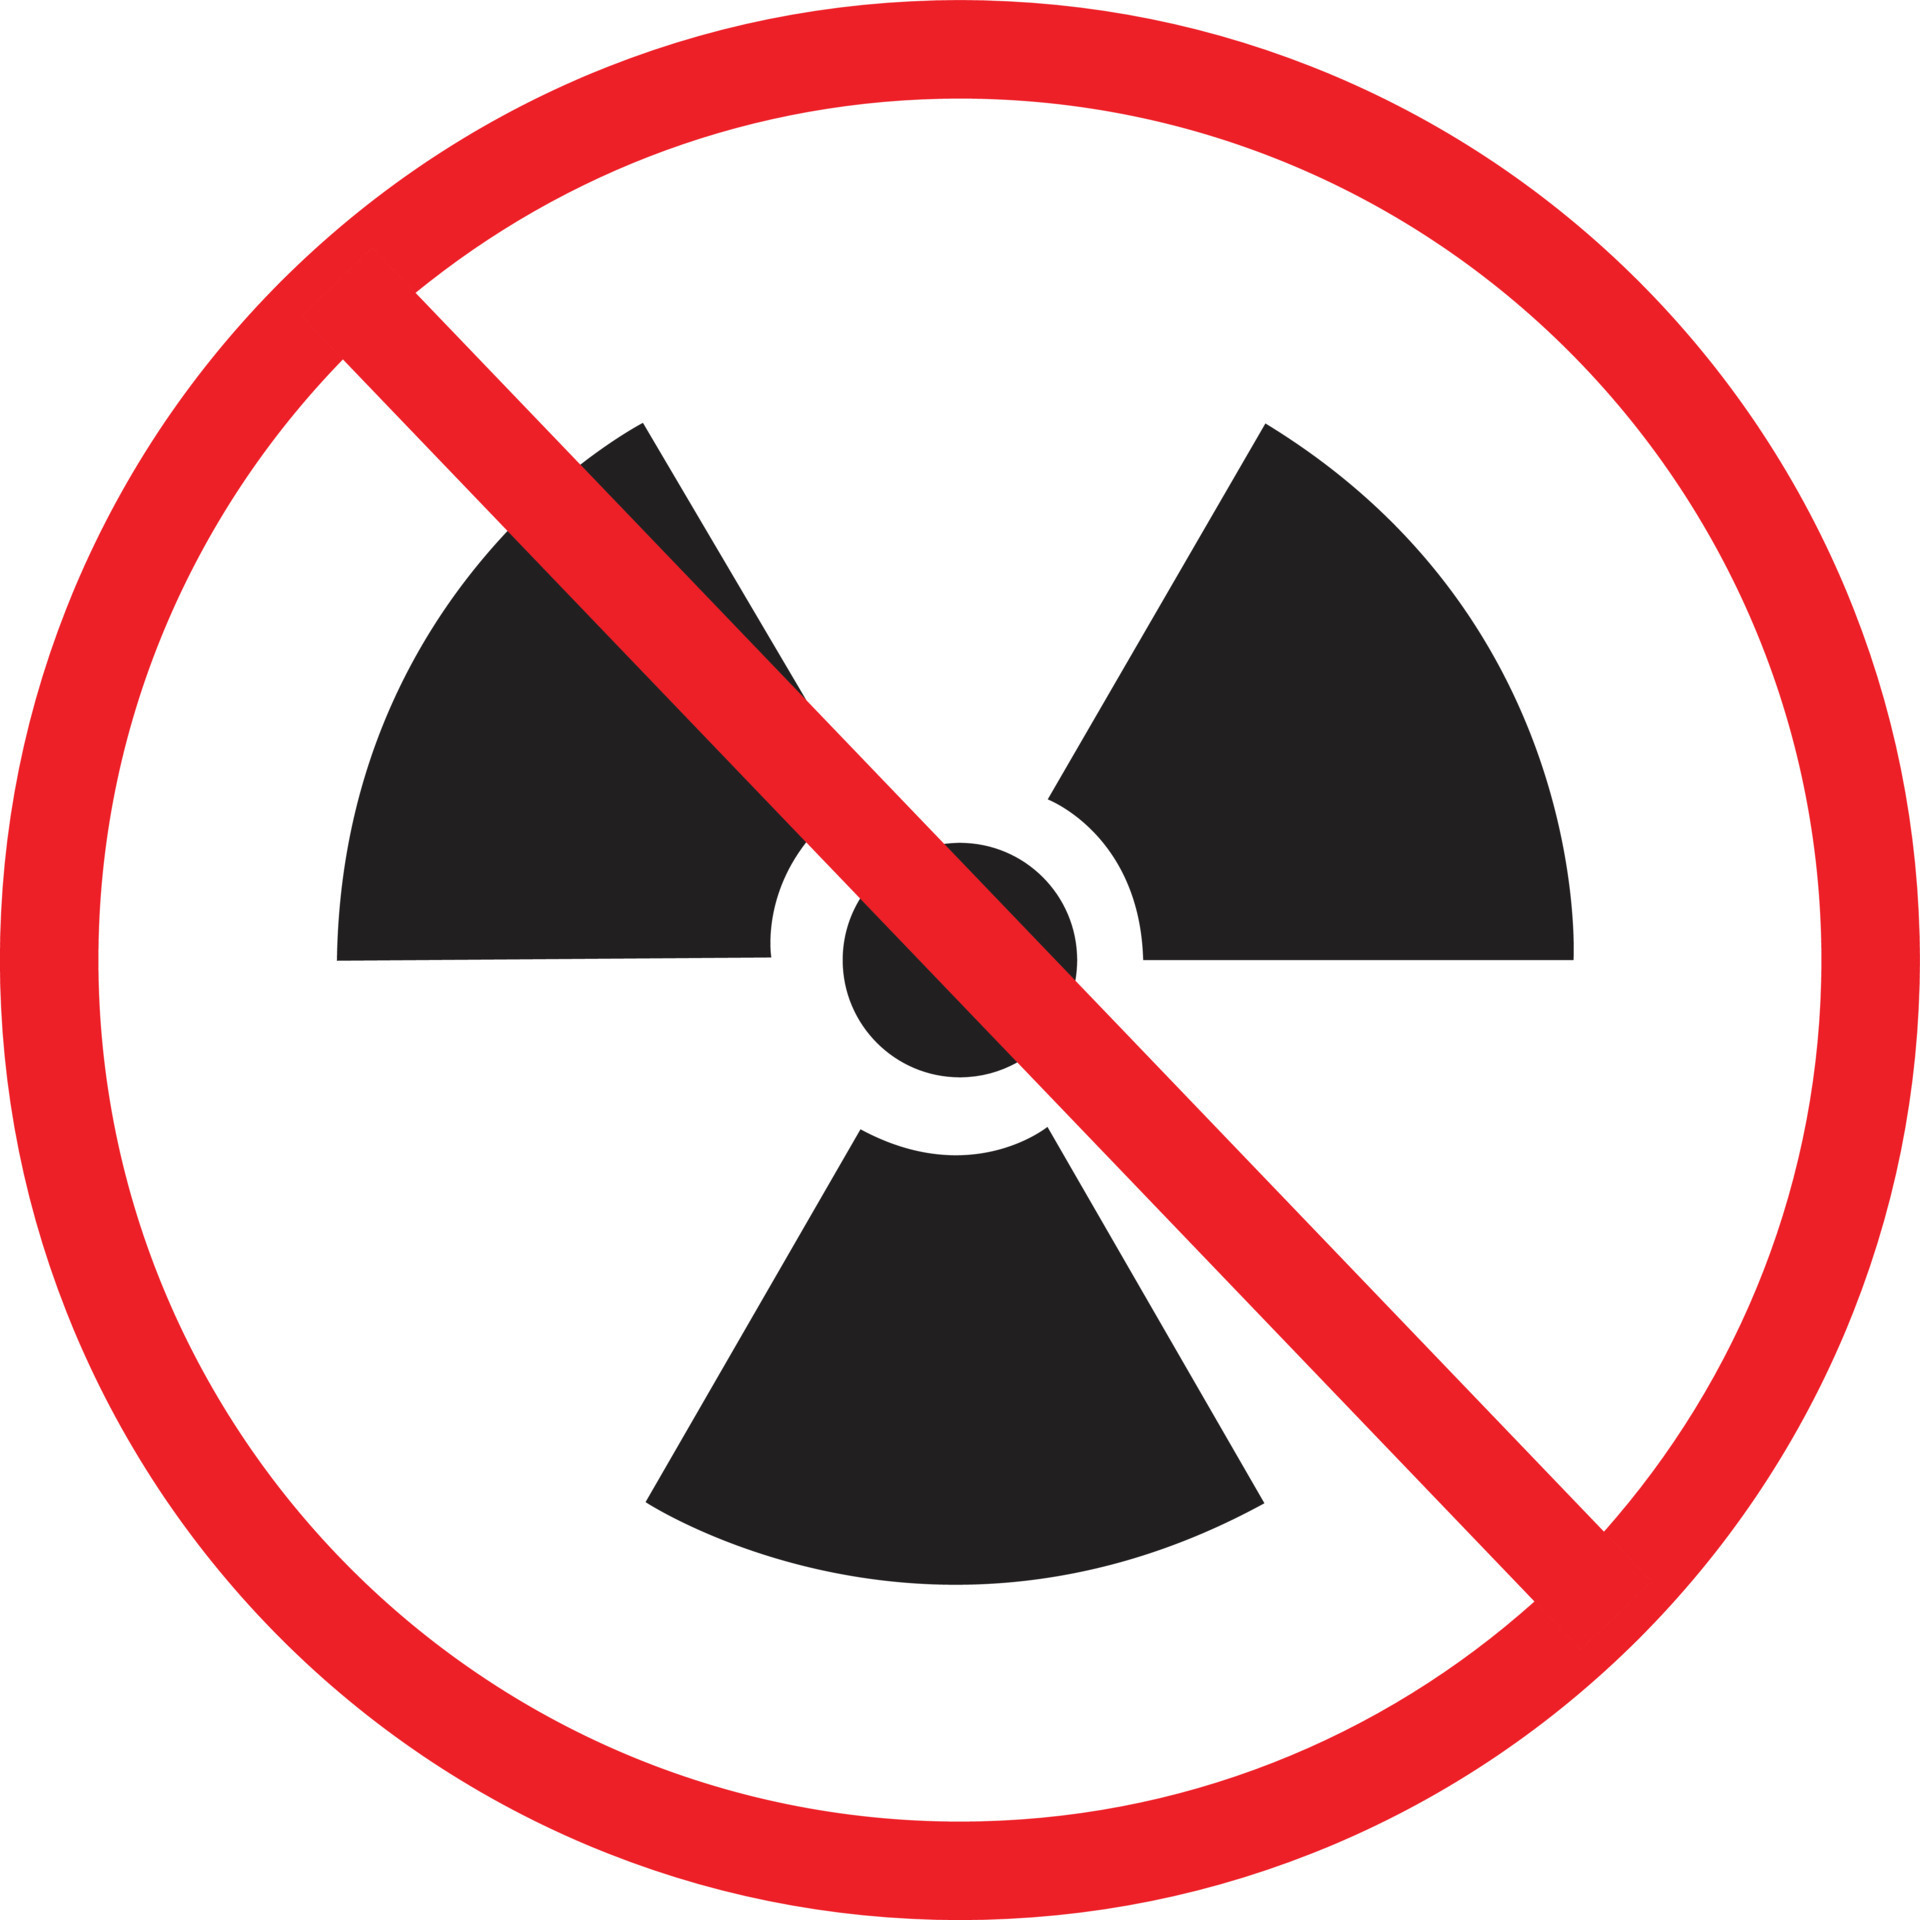 no-nuclear-power-icon-on-white-background-no-radiation-sign-no-nuclear-symbol-flat-style-vector.jpg